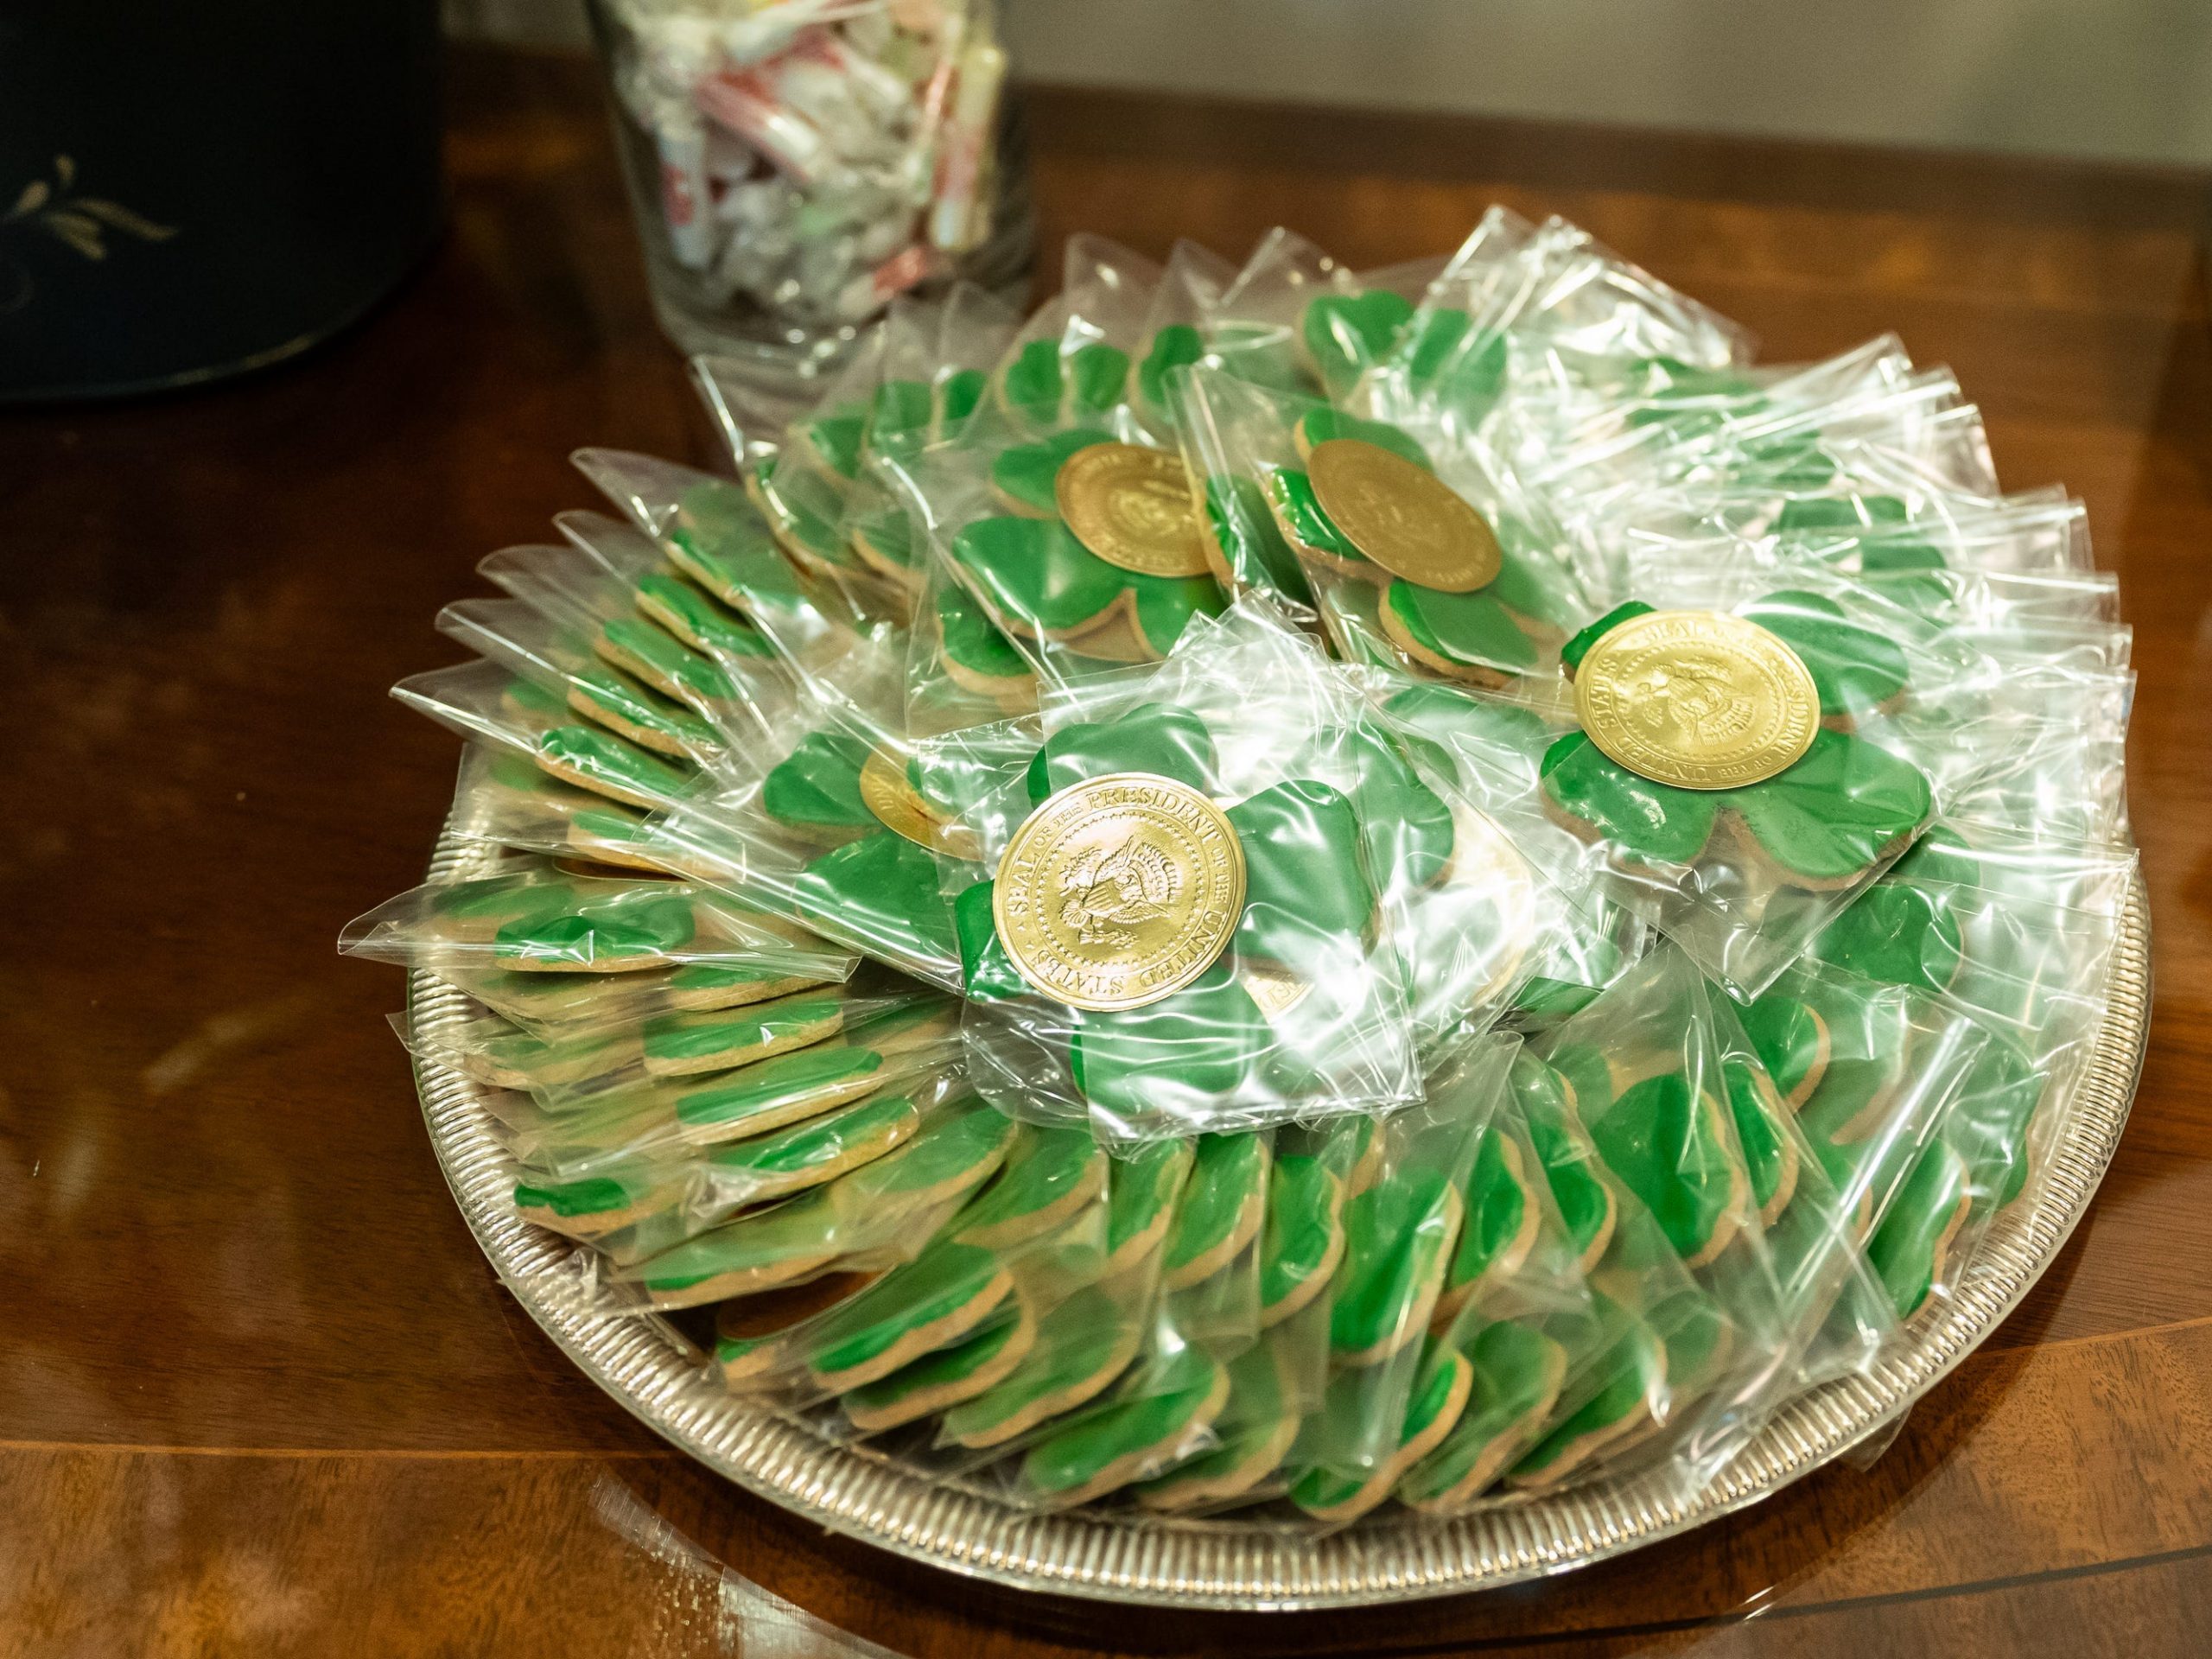 Shamrock Cookies at the White House